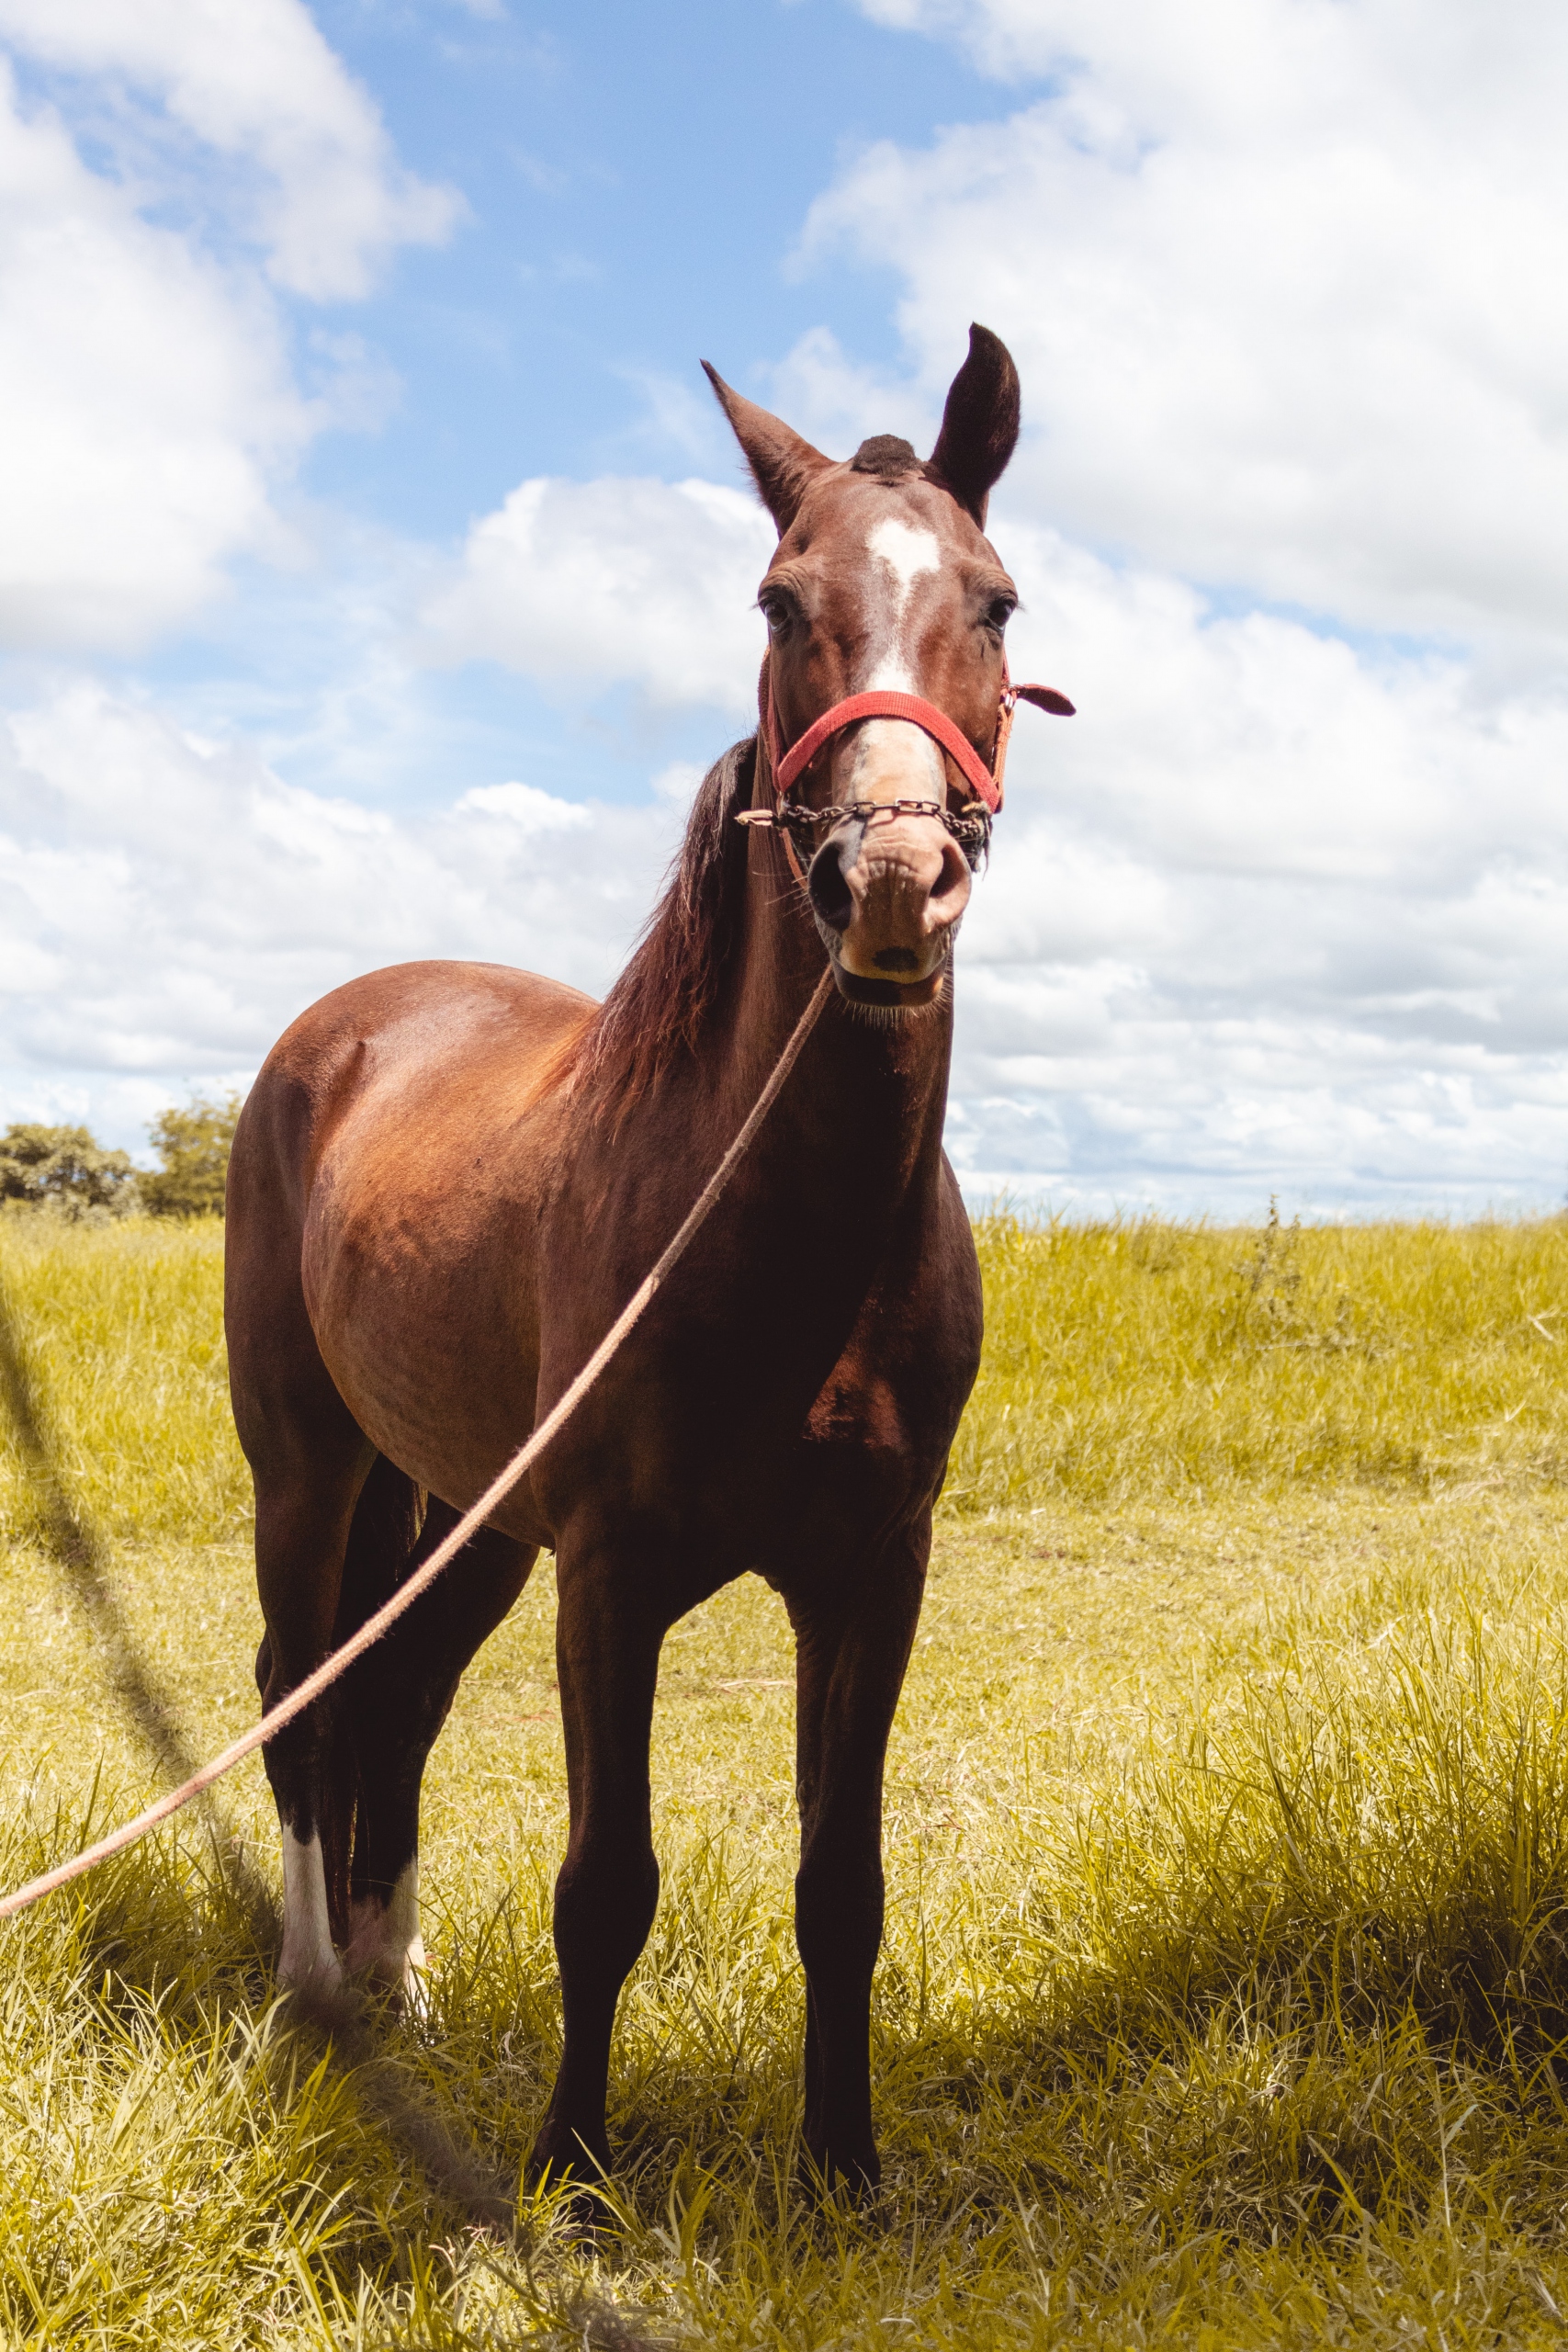 Are horses good for anxiety?